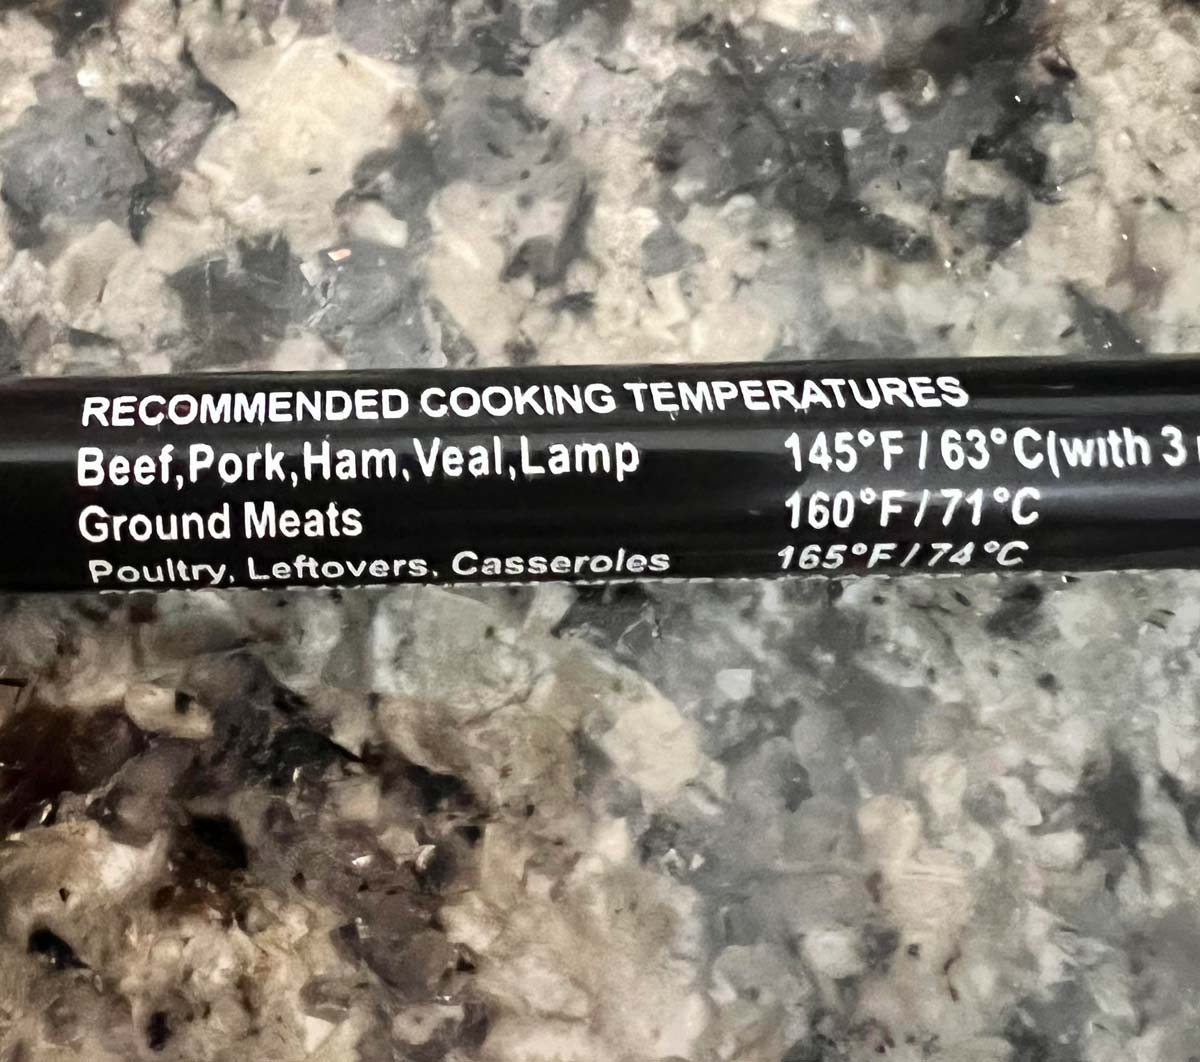 This typo on my meat thermometer